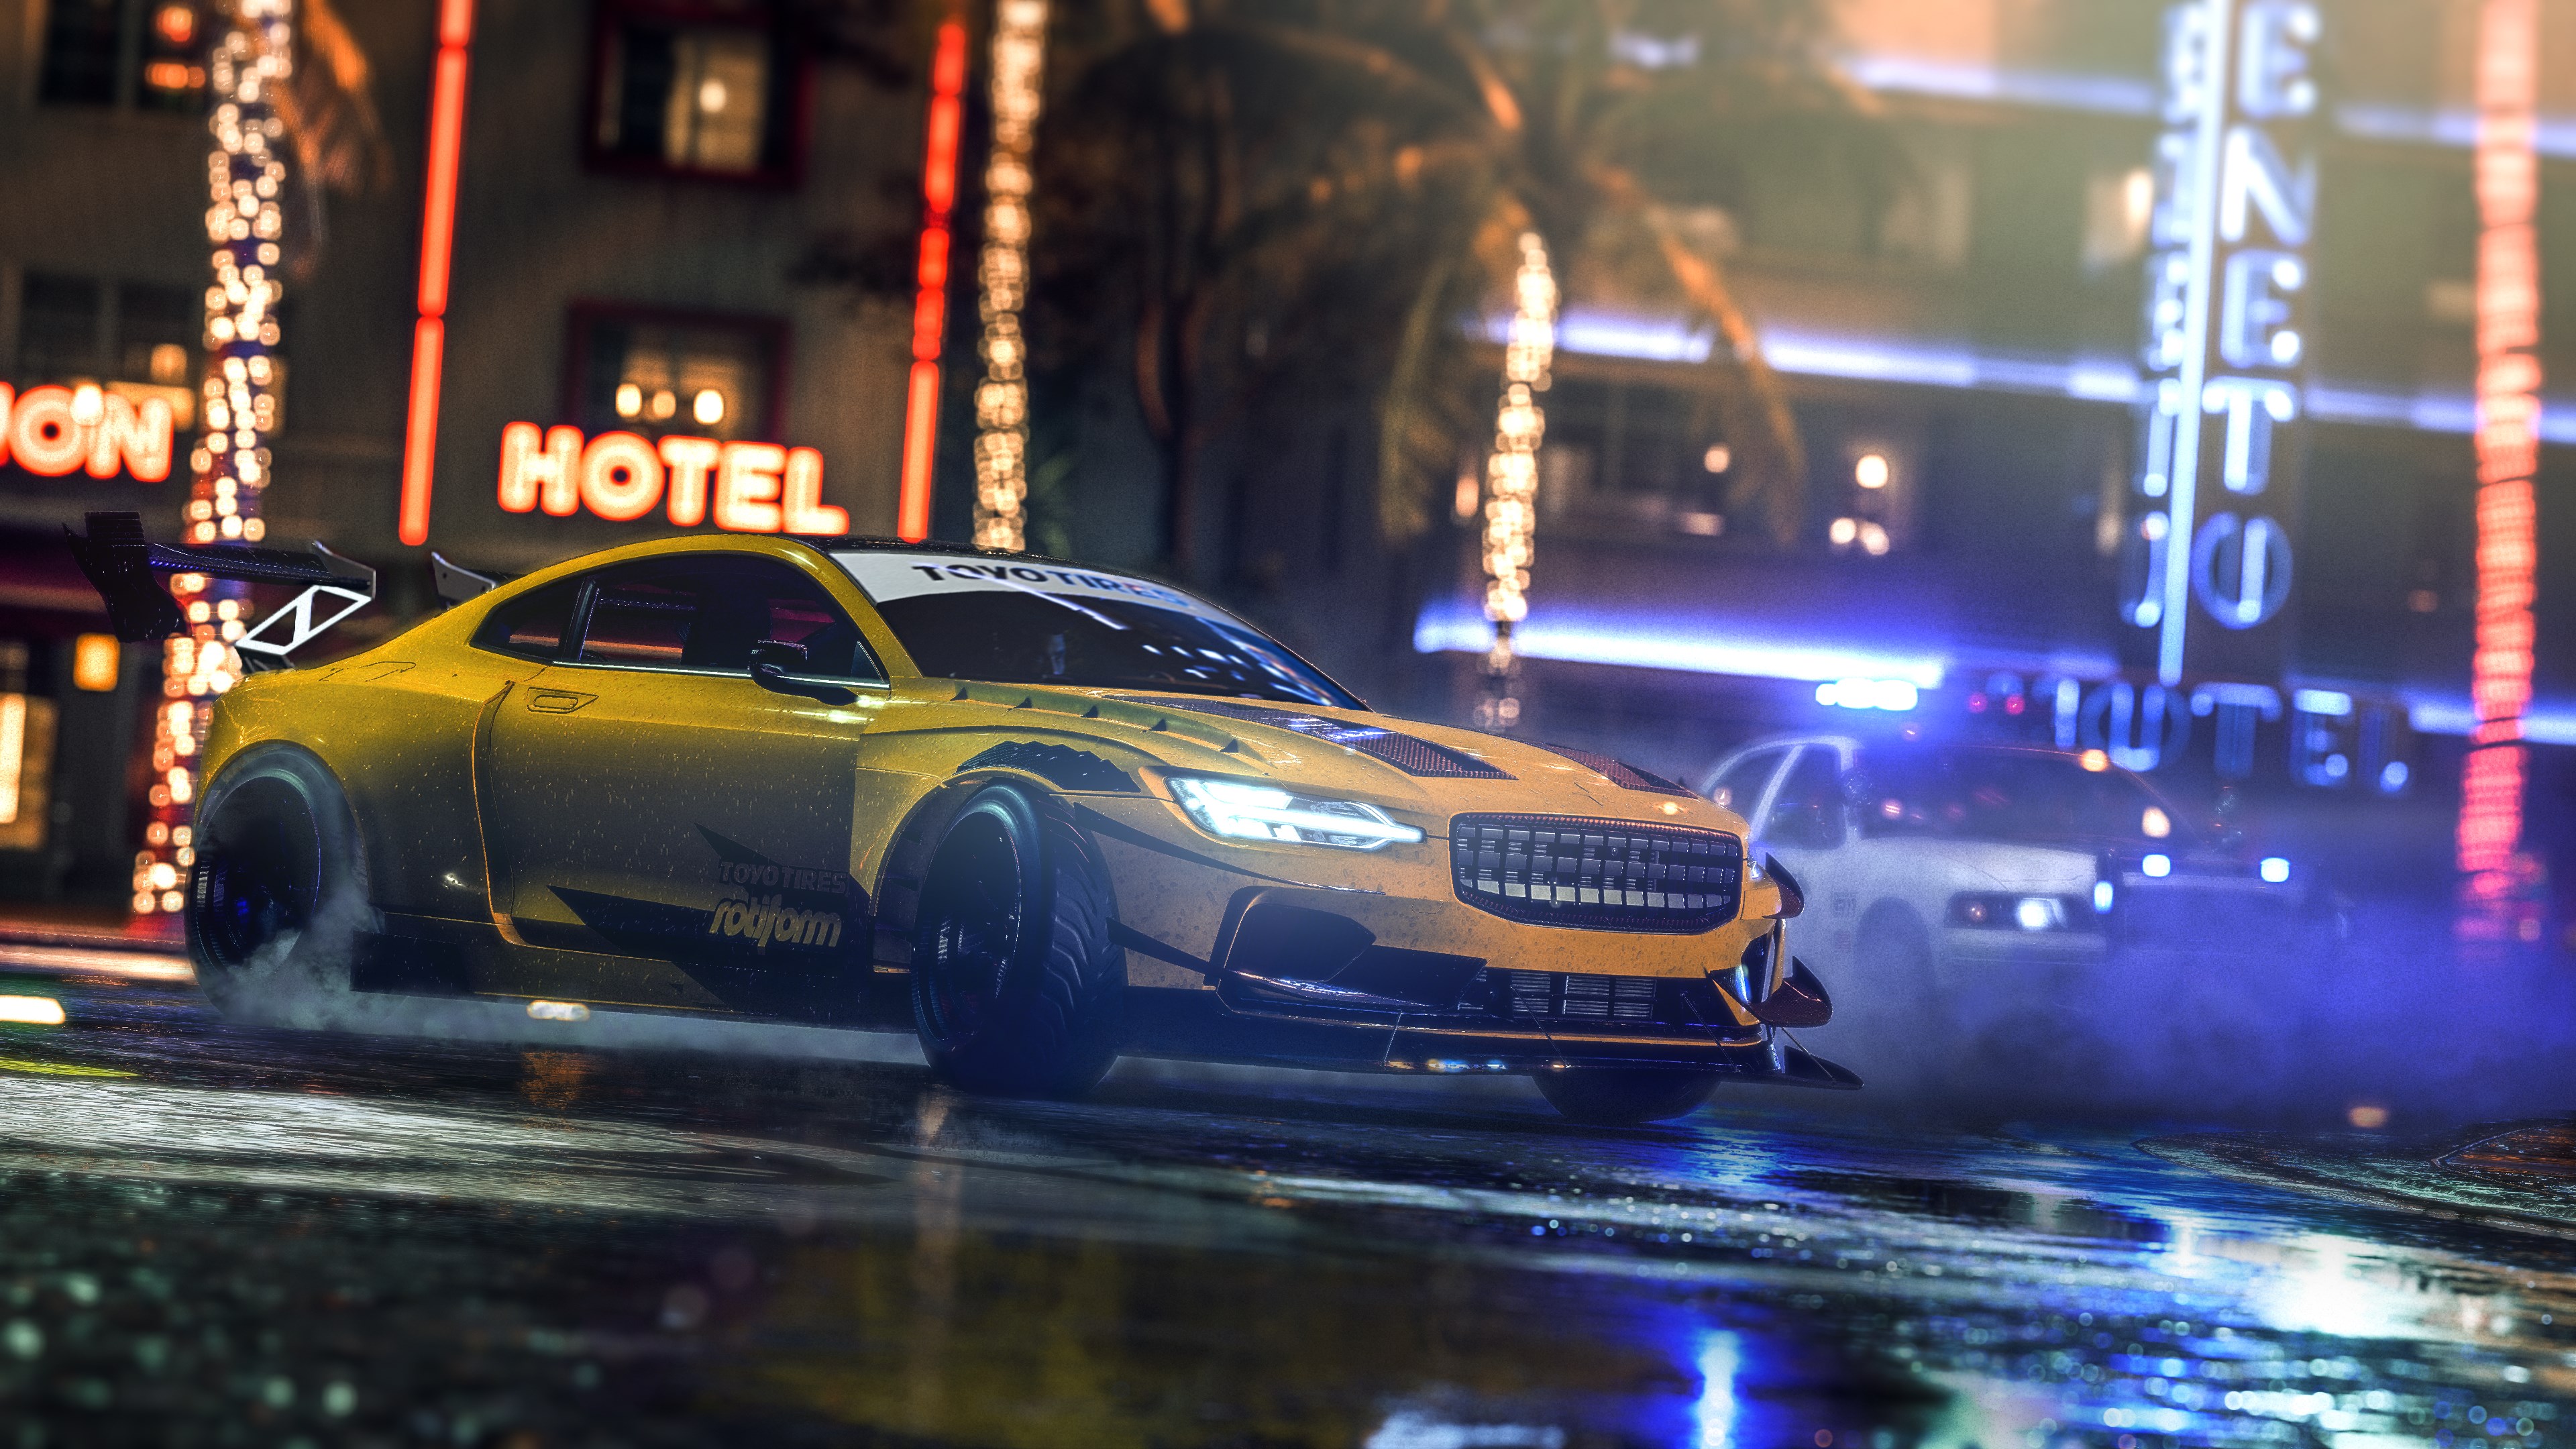 need for speed heat game pass